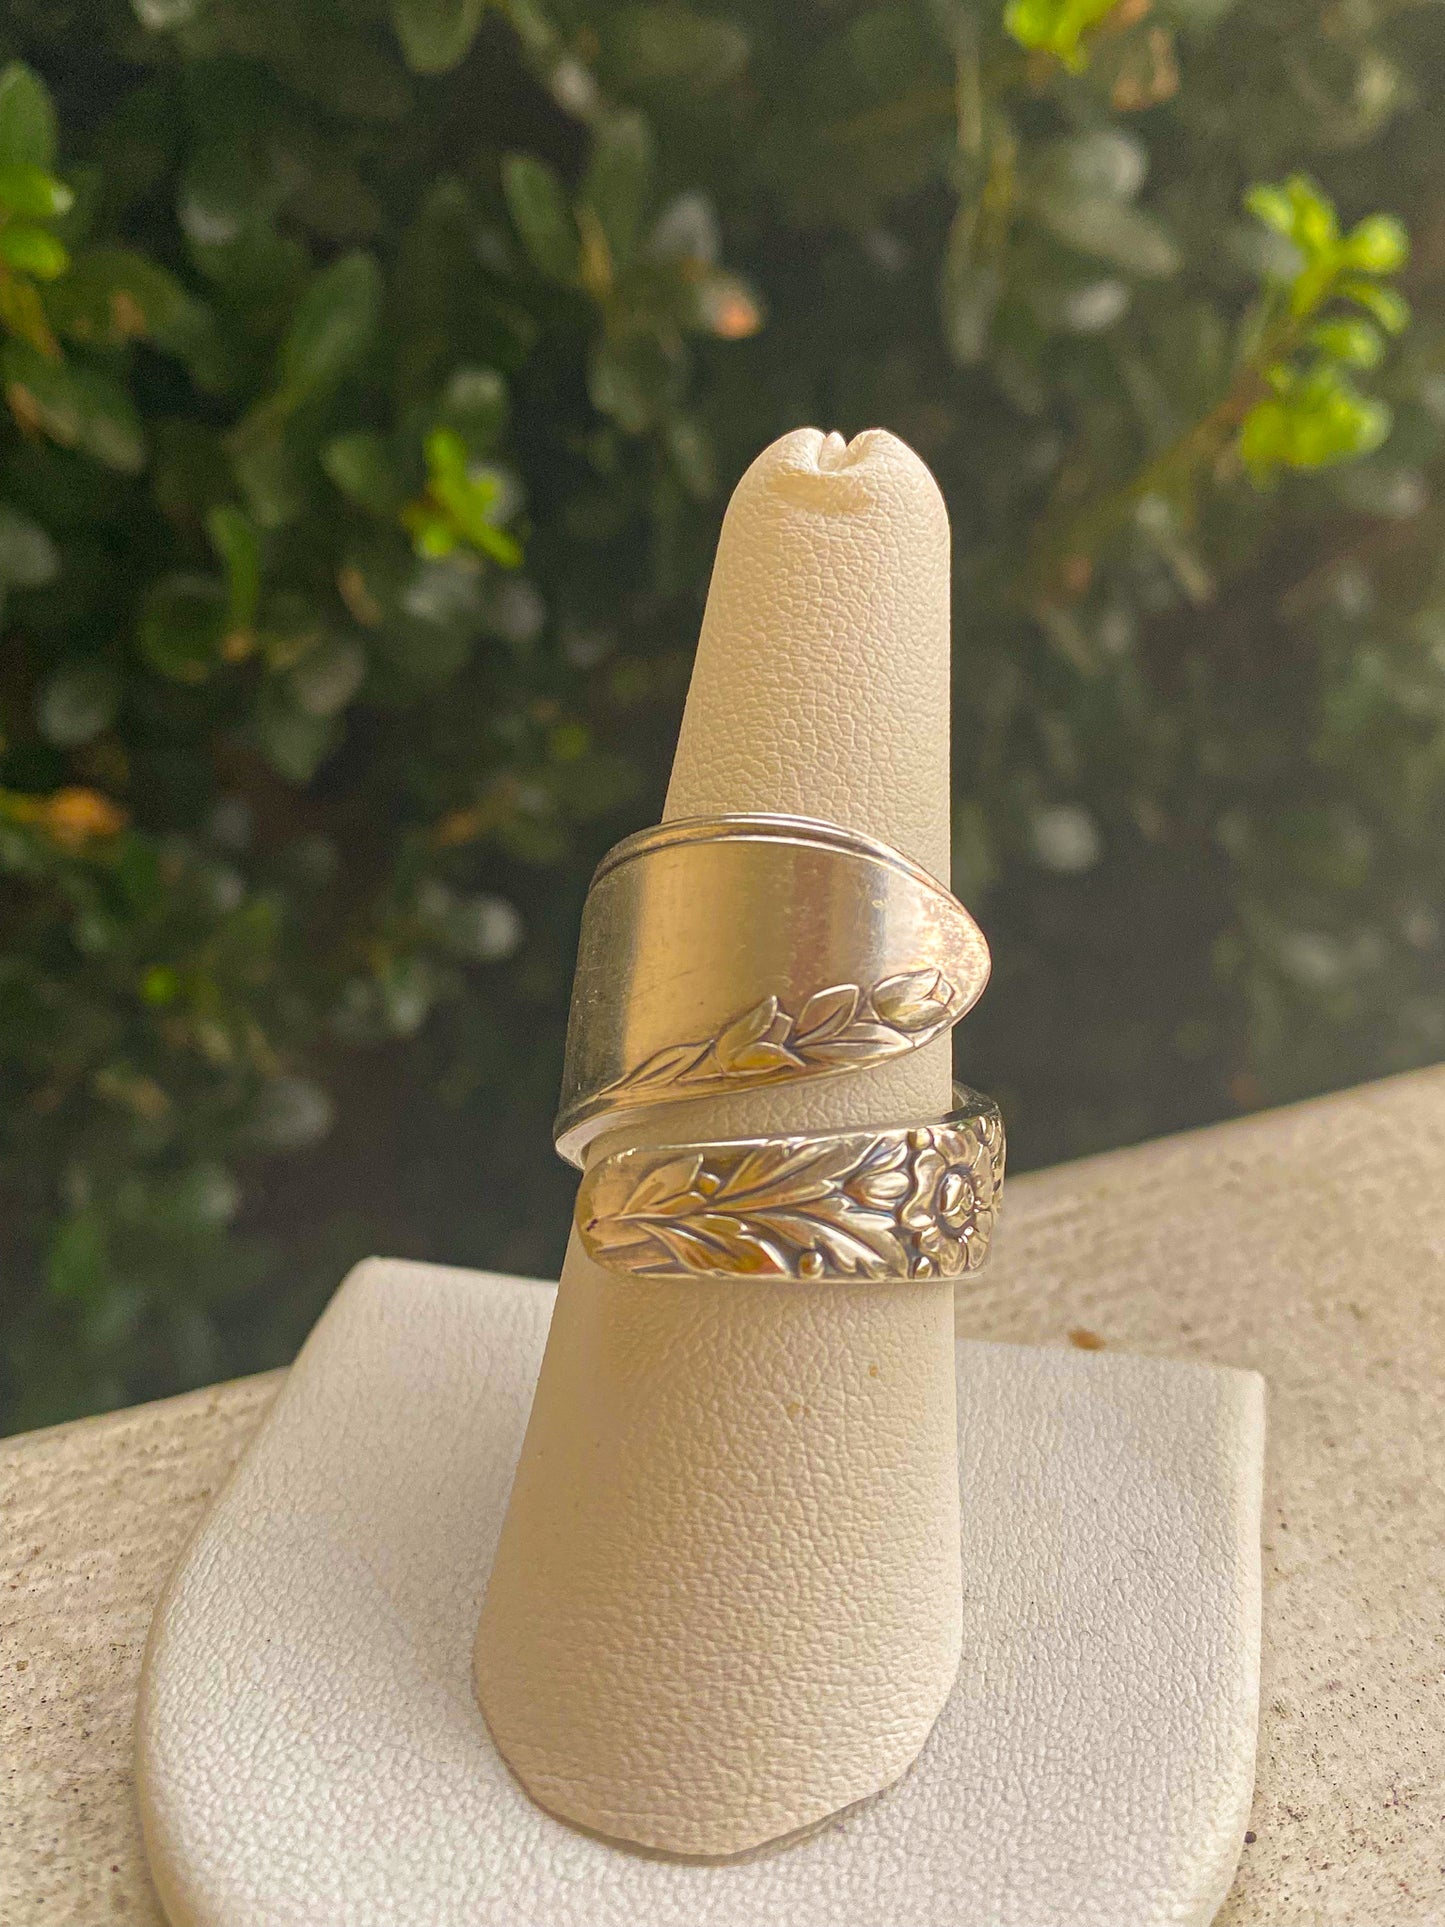 Mystery Spoon Ring - Design Your Own